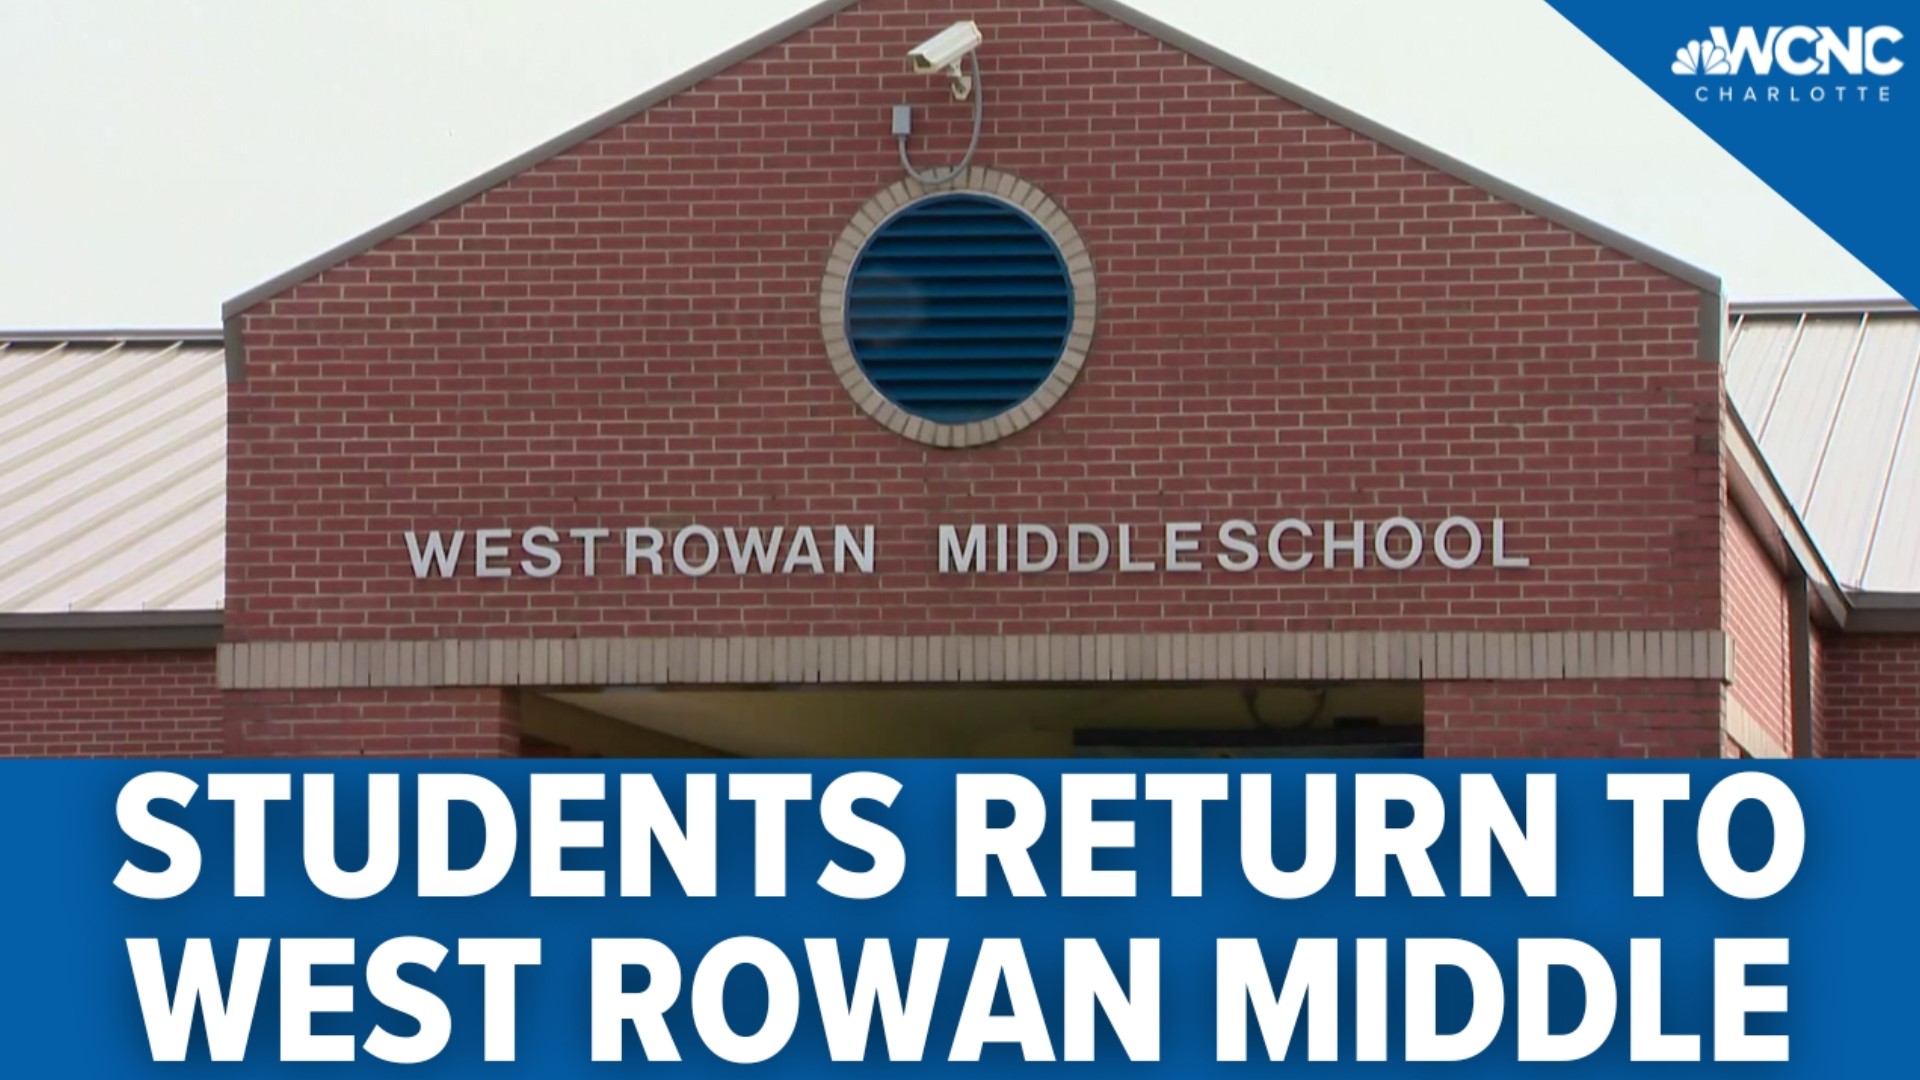 Students at West Rowan Middle School returned to in-person learning after mold was found in the HVAC system last month.